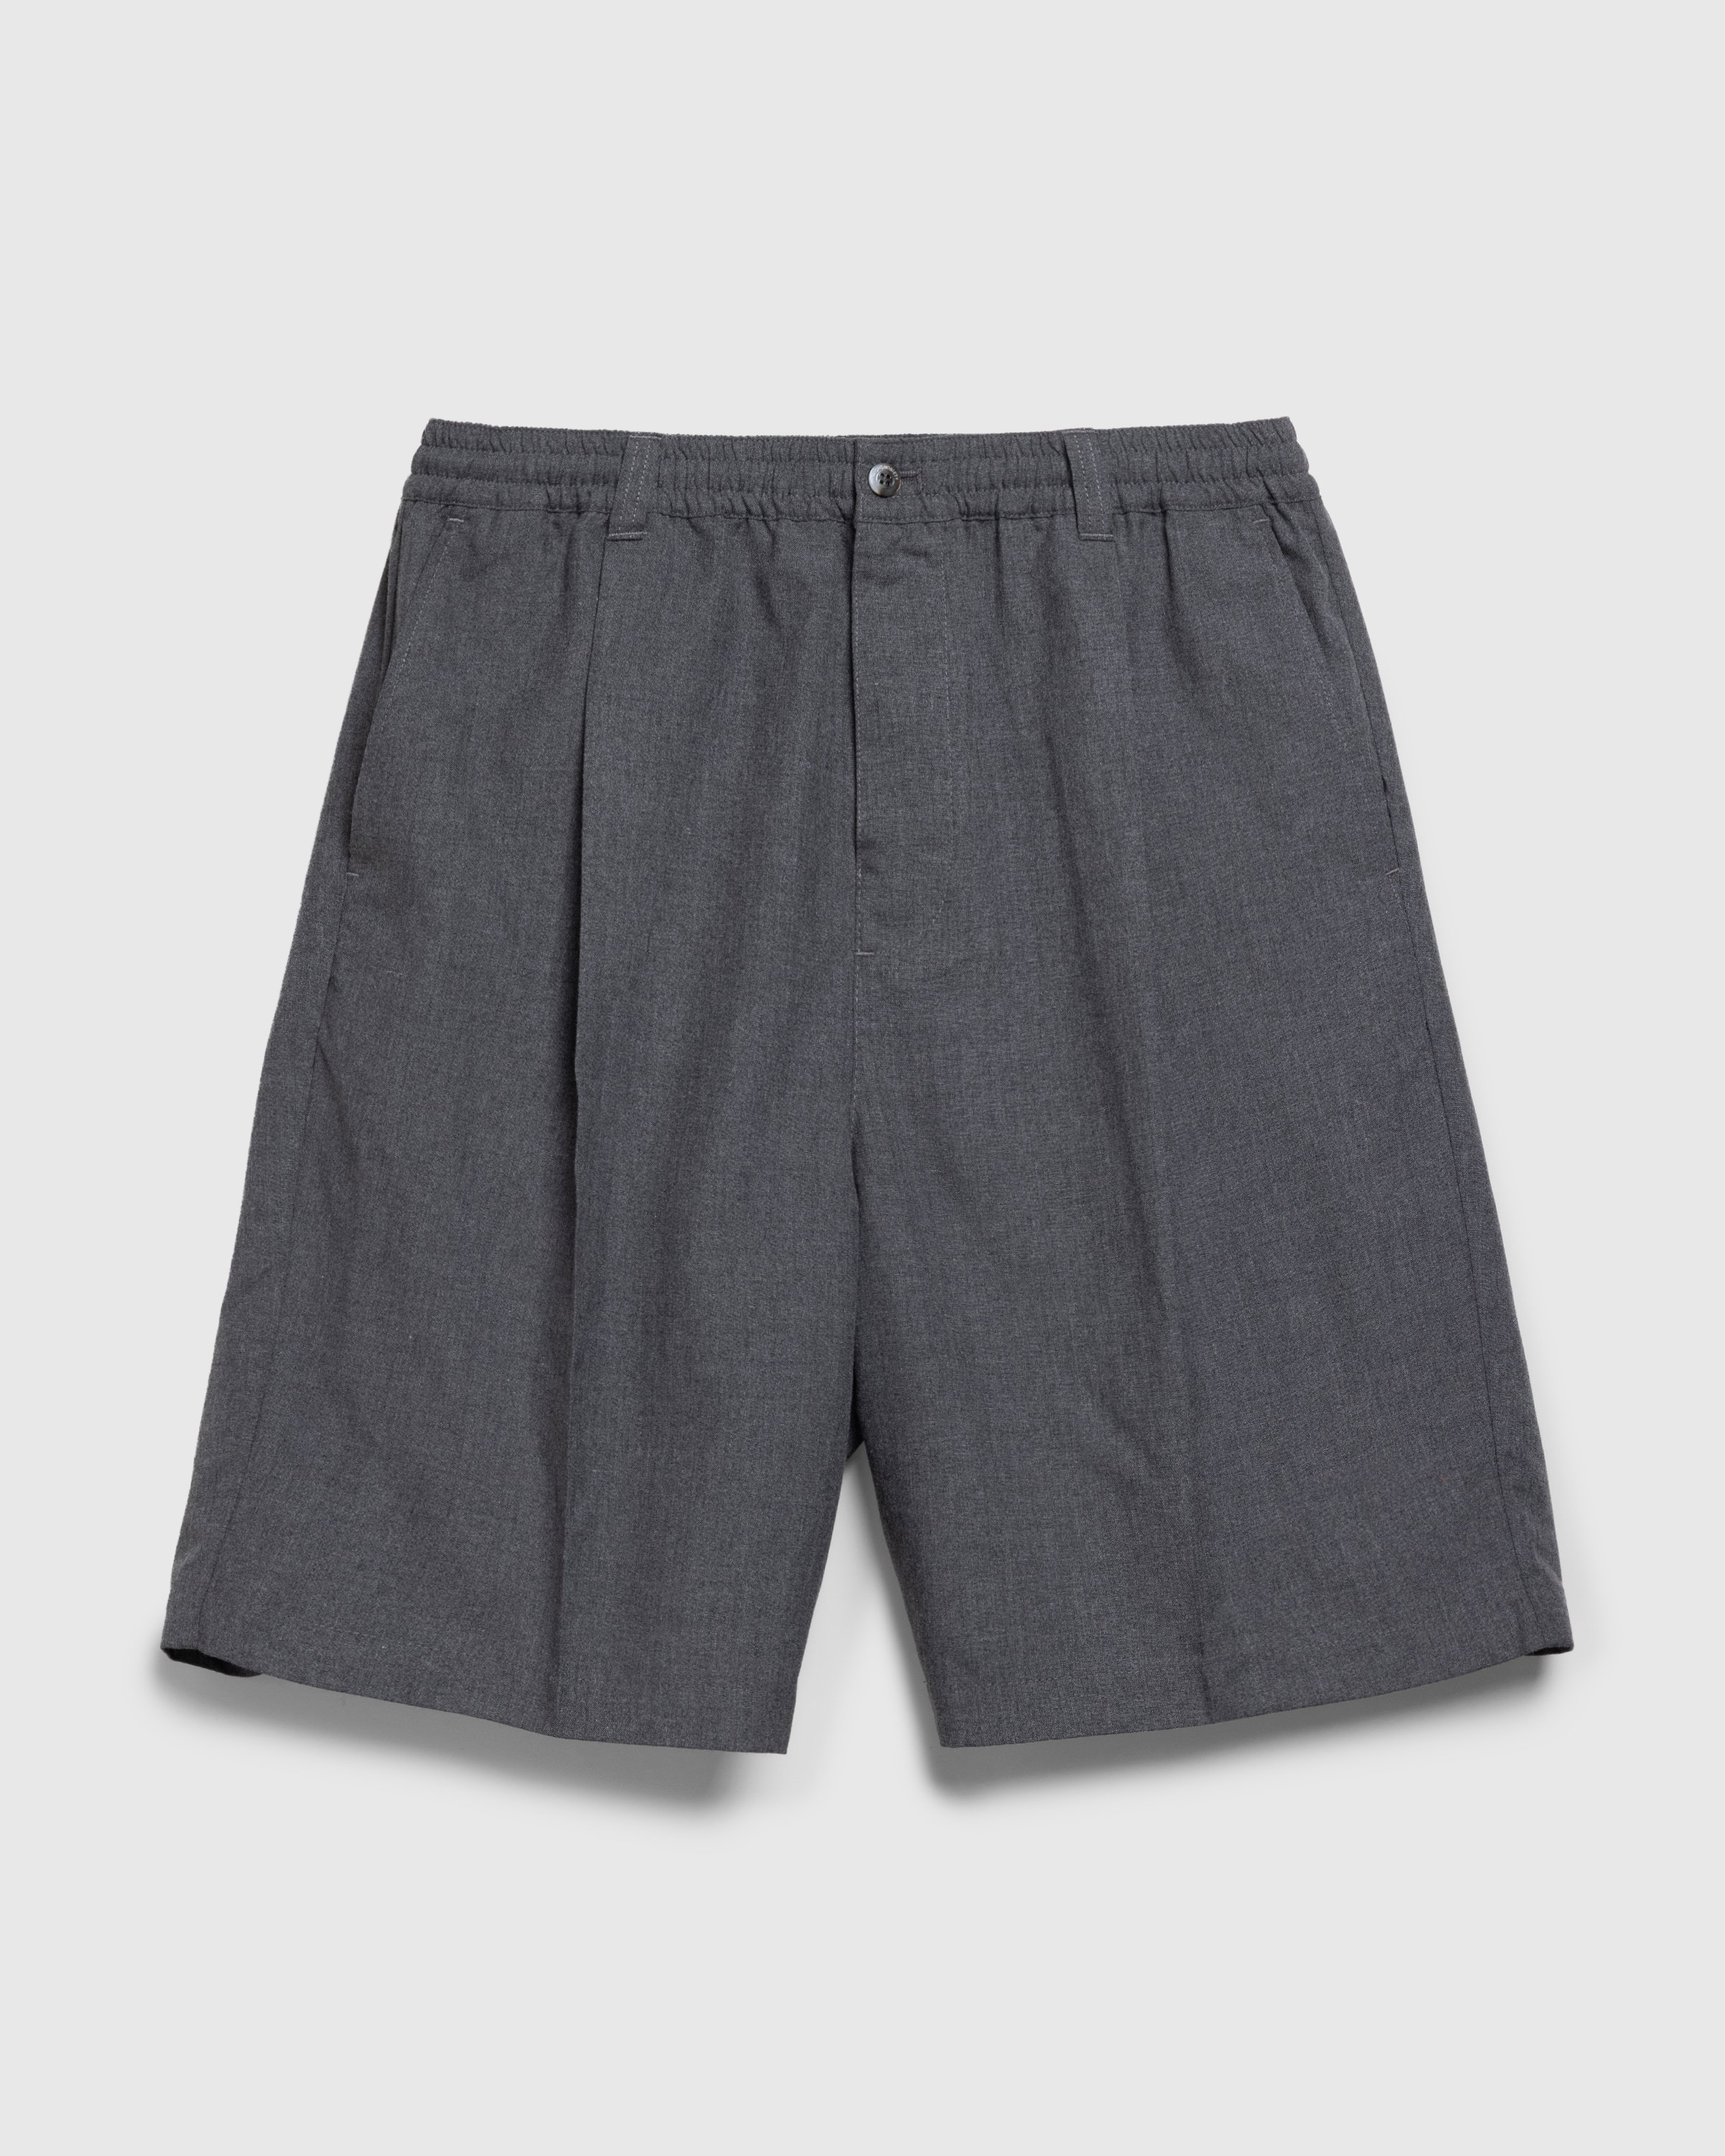 Highsnobiety HS05 - Tropical Suiting Shorts - Clothing - Grey - Image 1